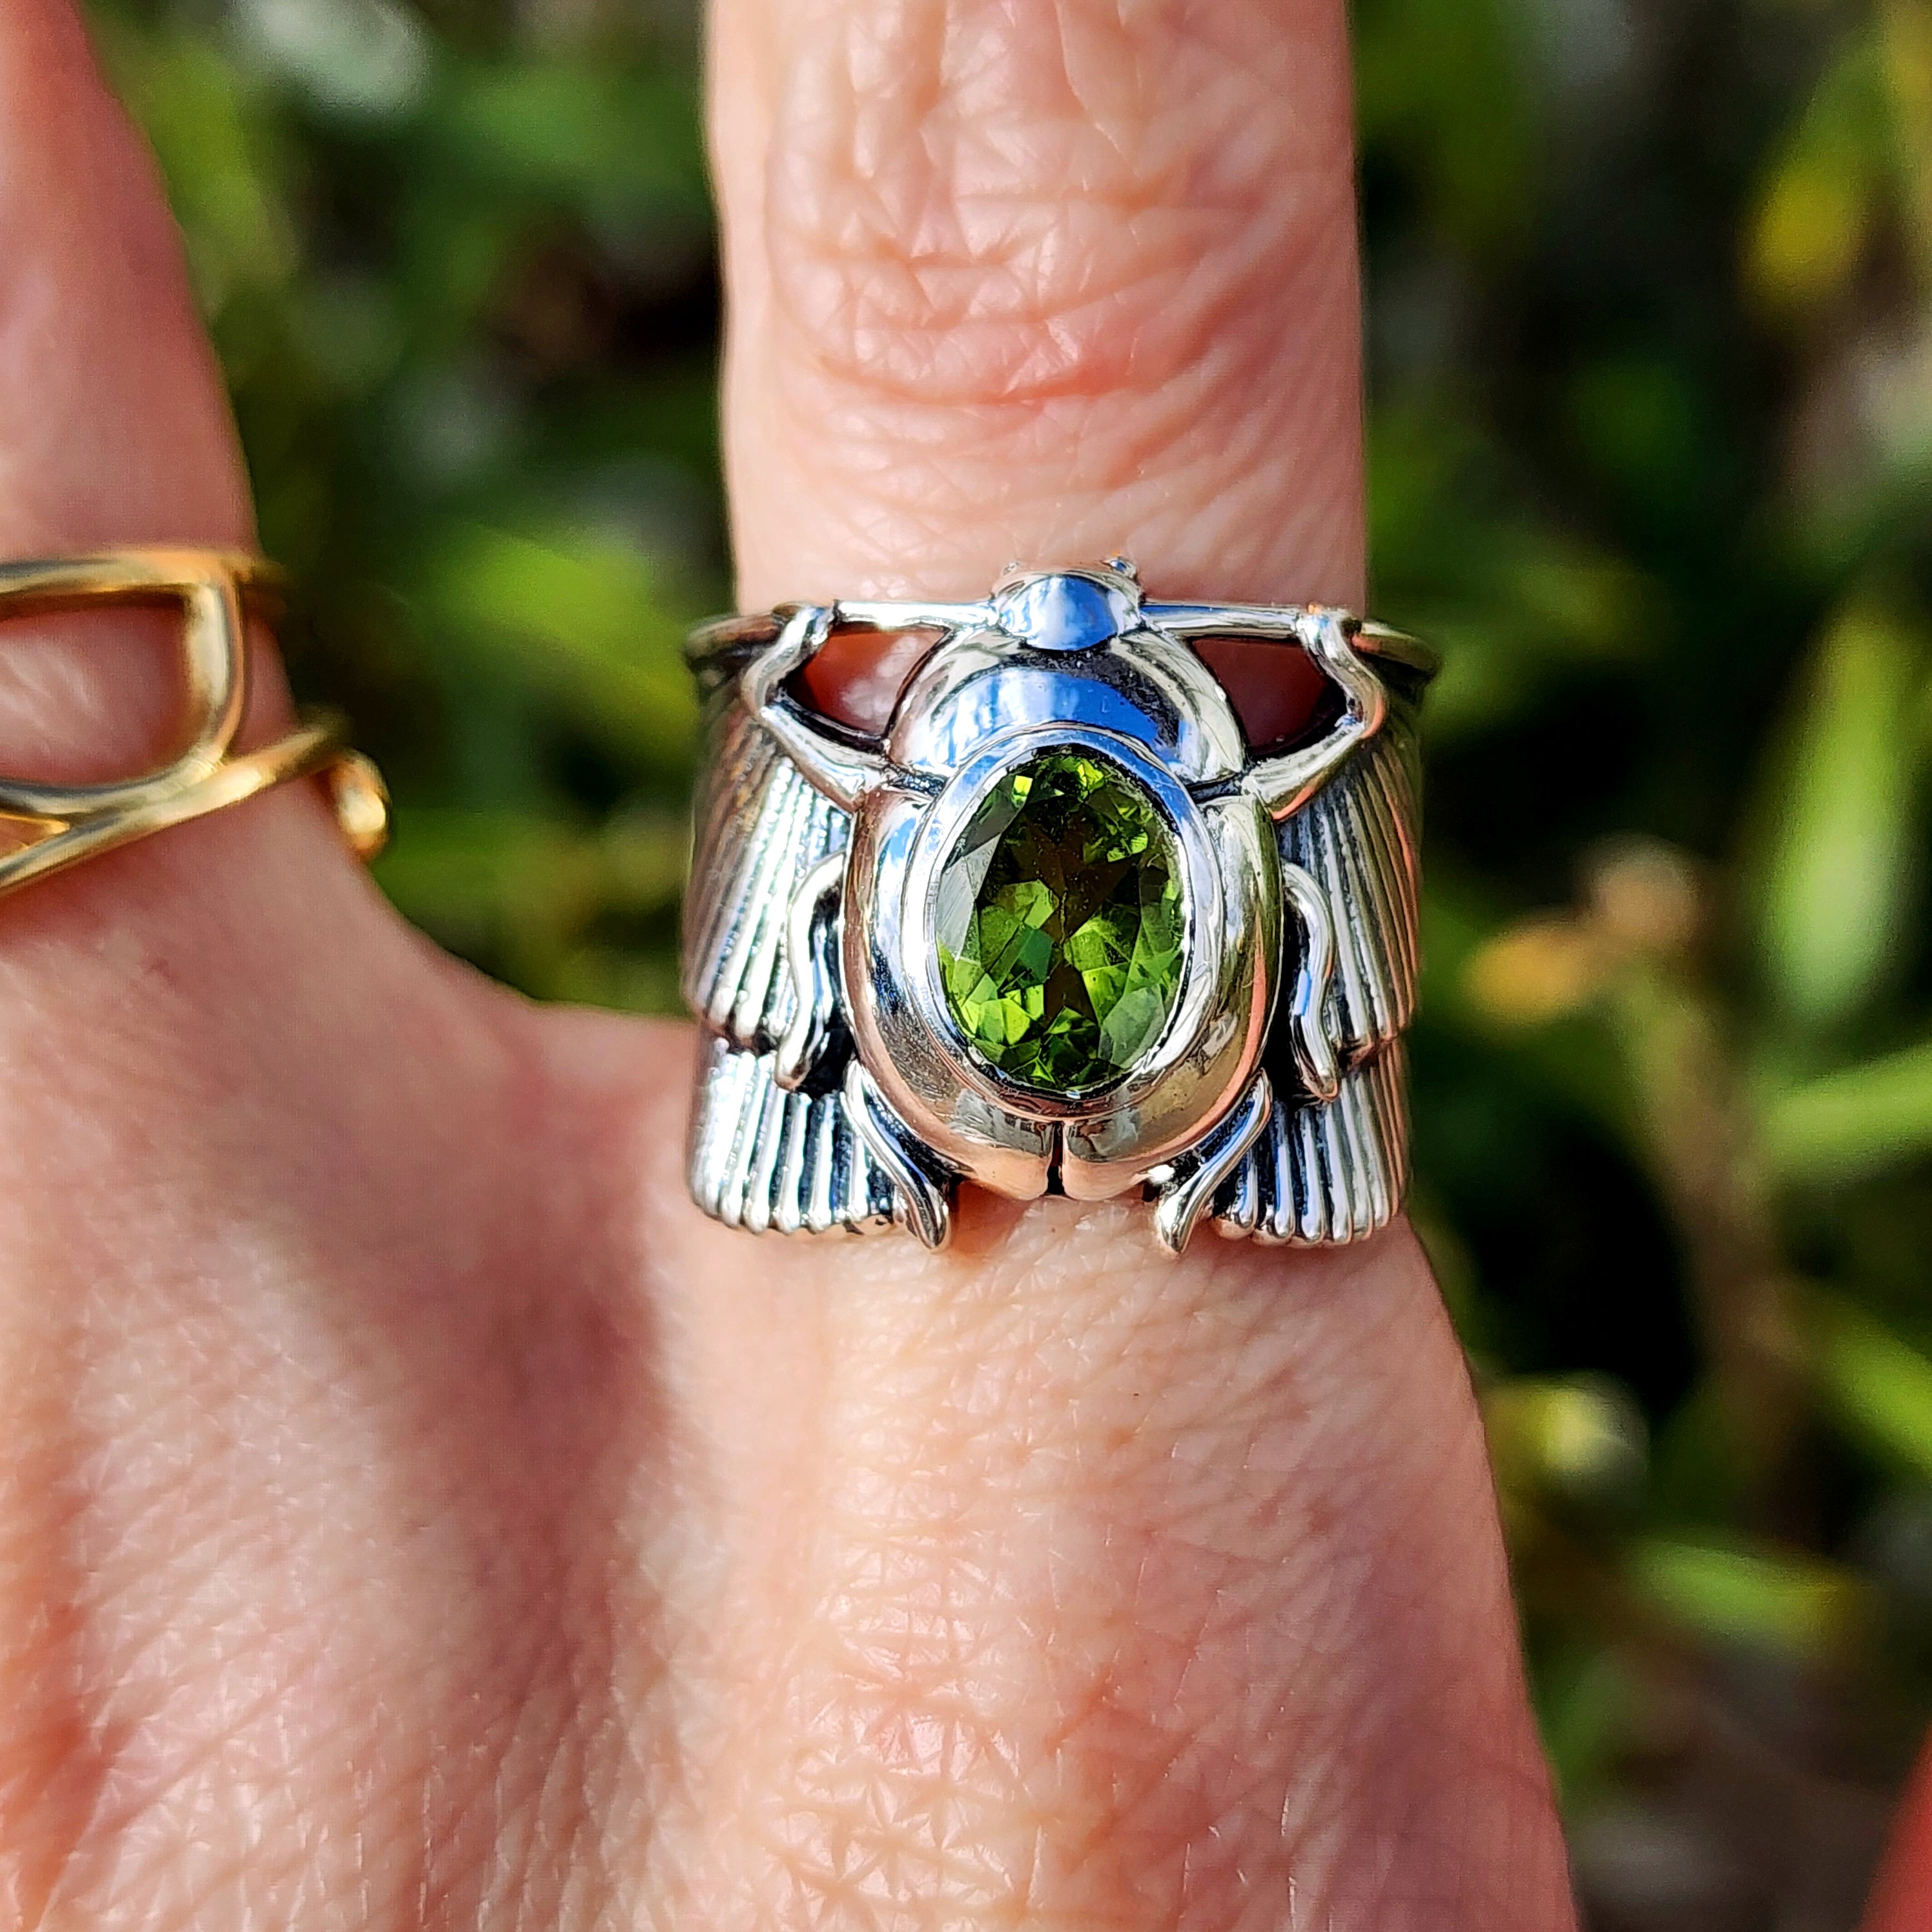 Peridot Scarab Finger Cuff Adjustable Ring .925 Silver for Abundance, Health, Protection and Power